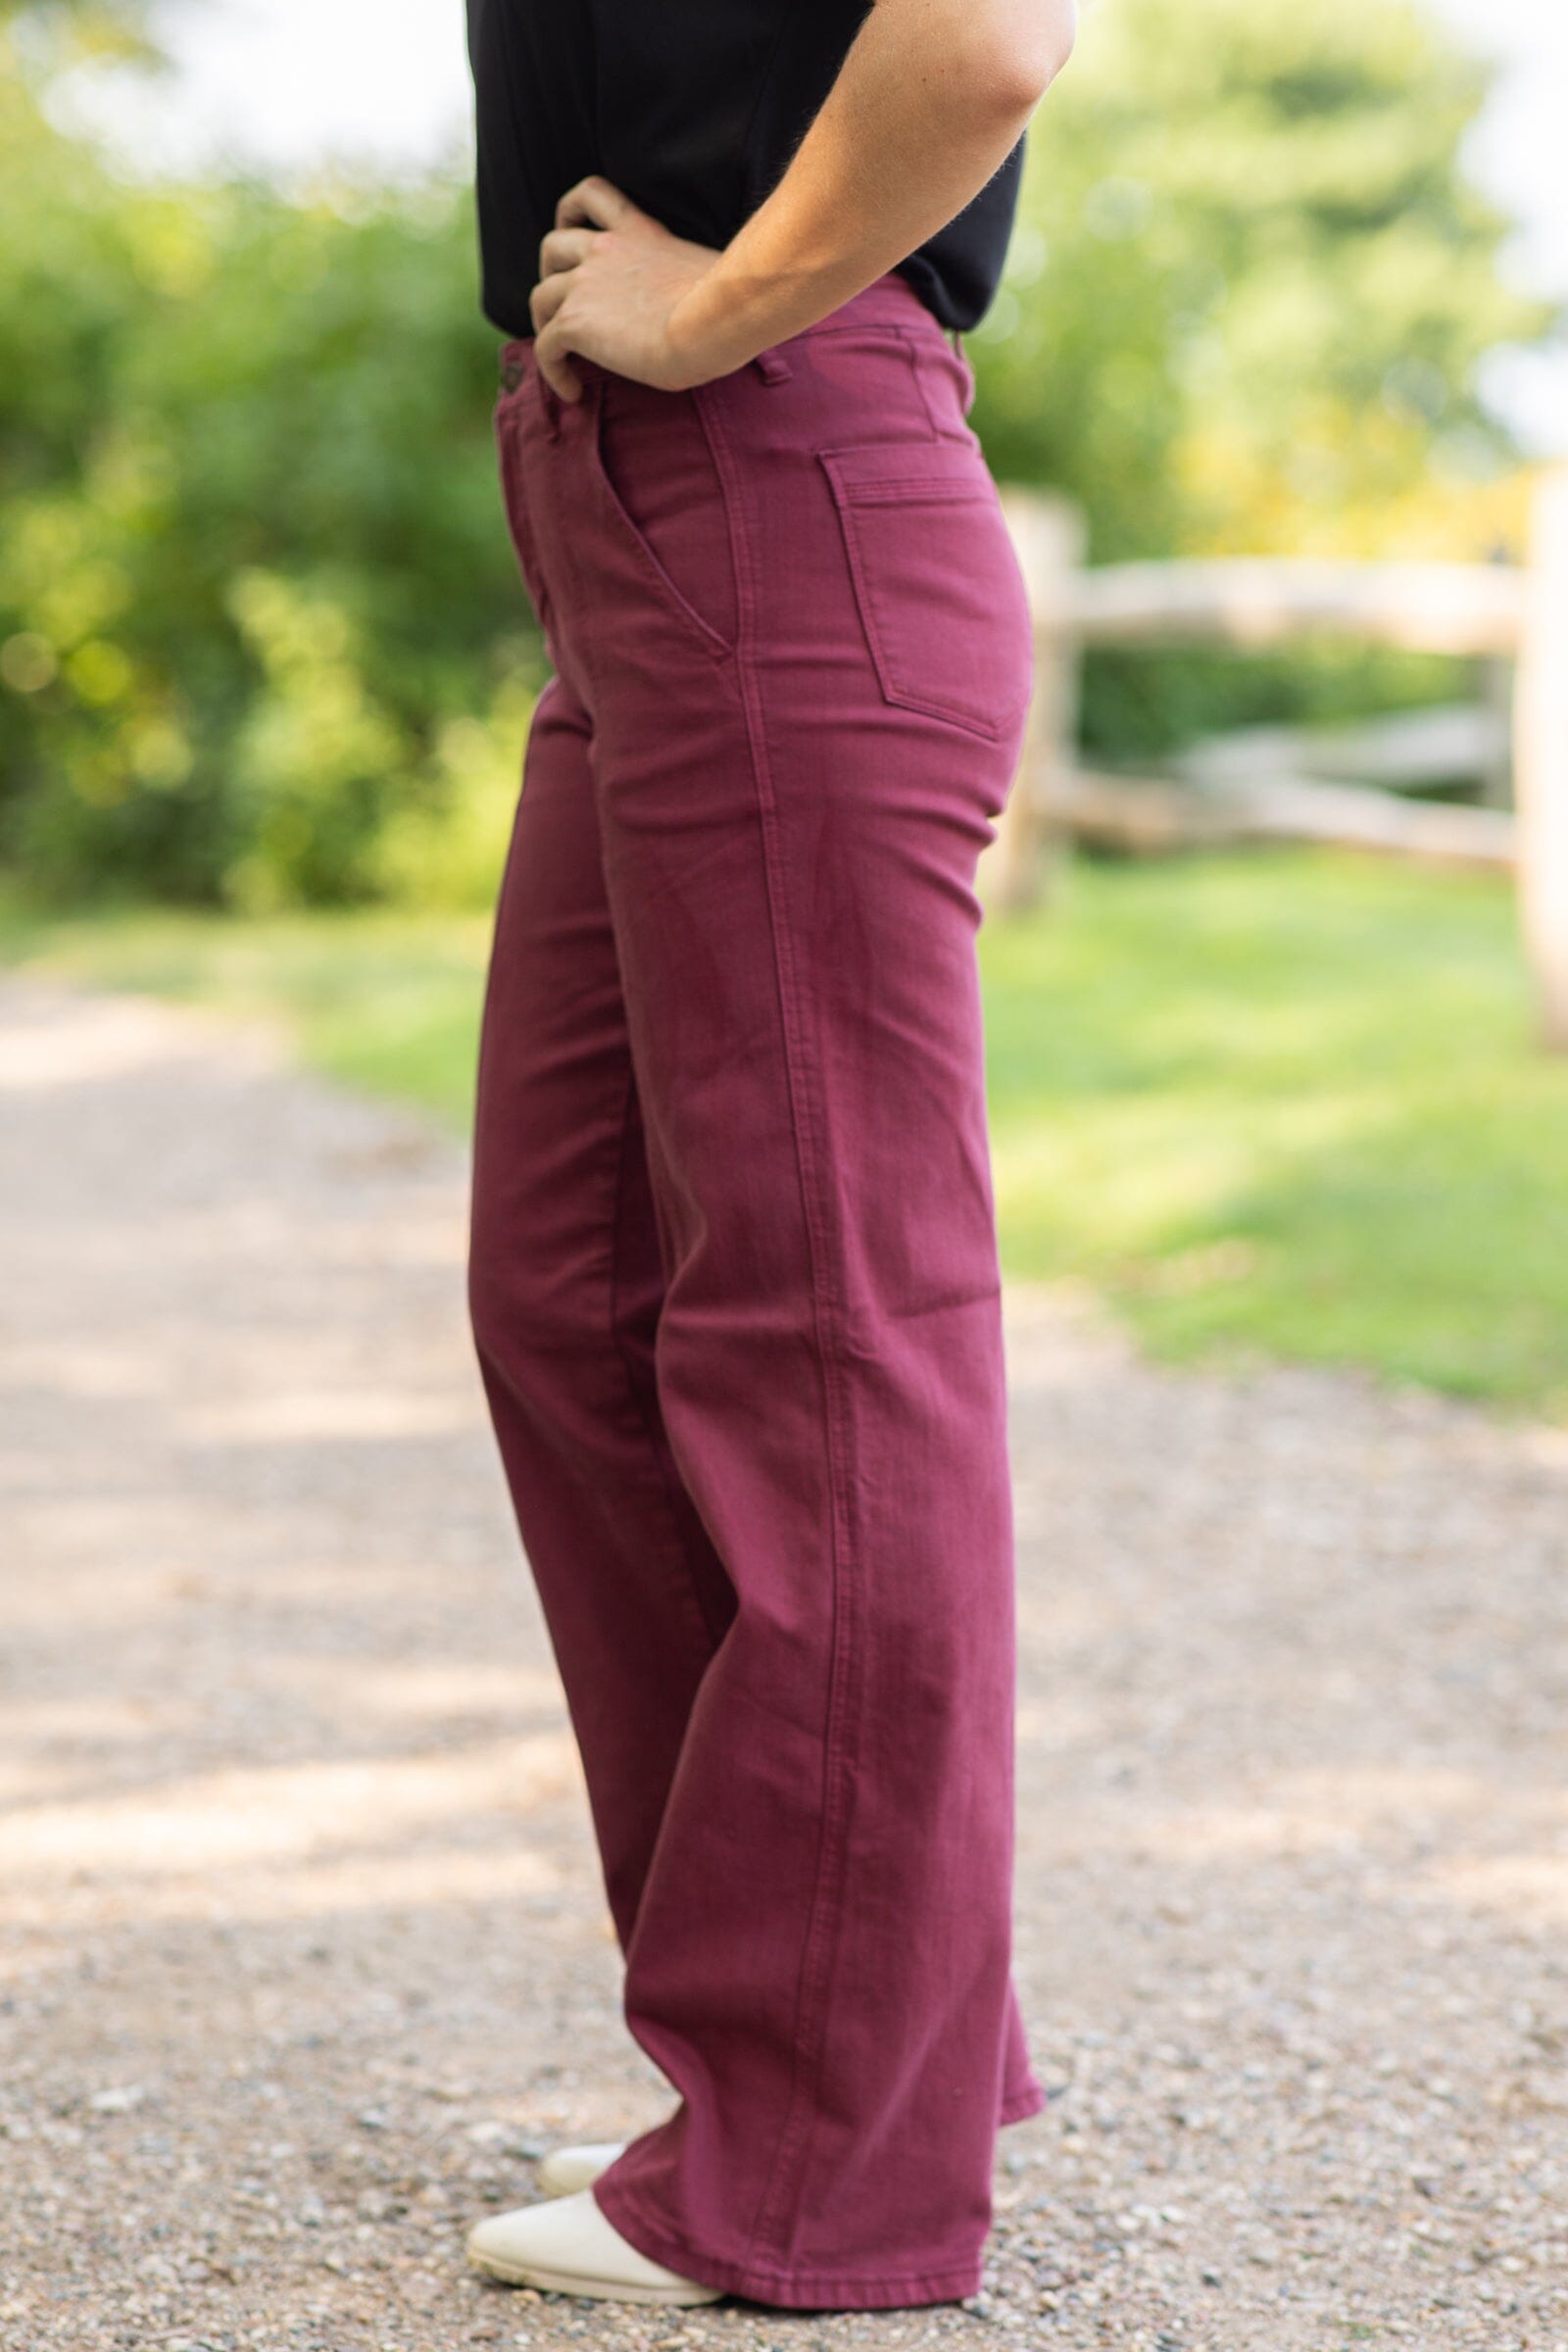 Judy Blue Wine Garment Dyed Straight Leg Jeans - Filly Flair